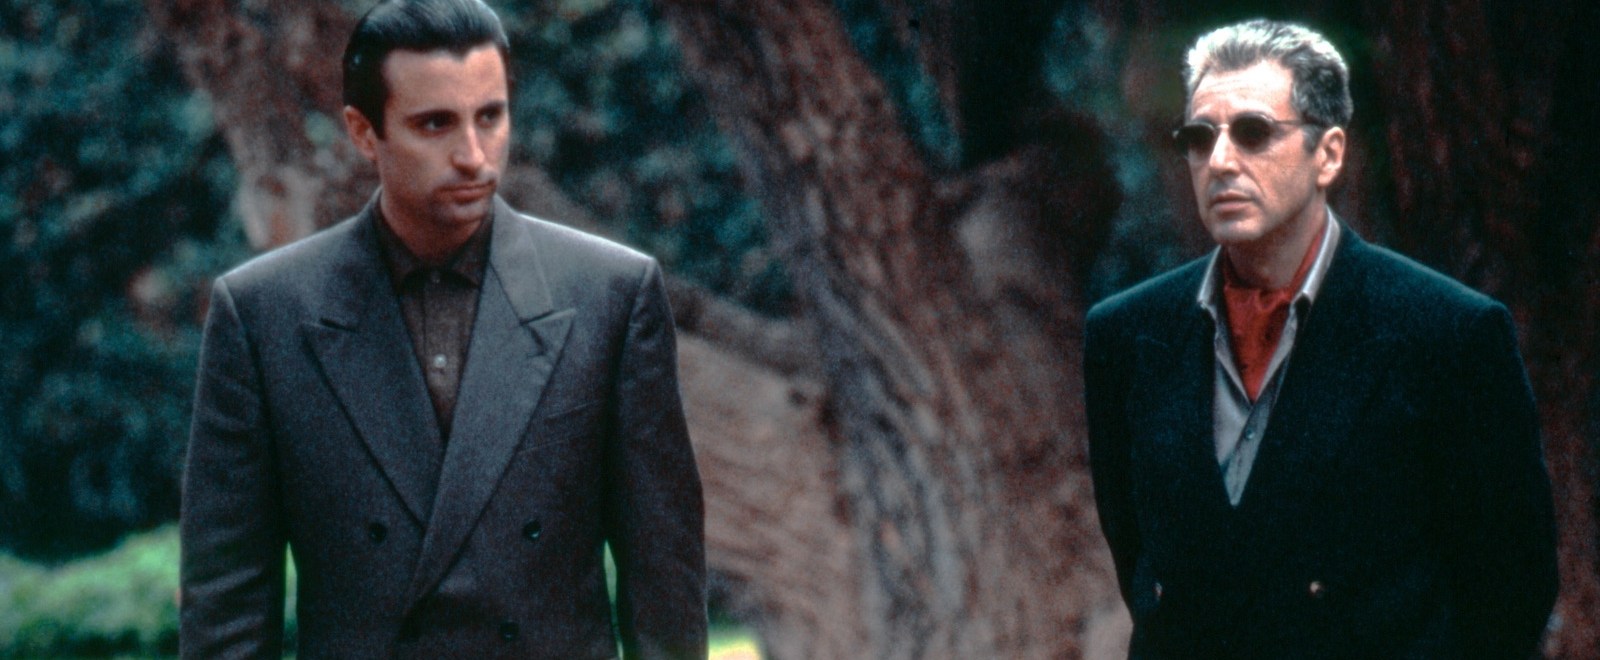 The Godfather Coda': Noting Changes In New 'The Godfather Part III'